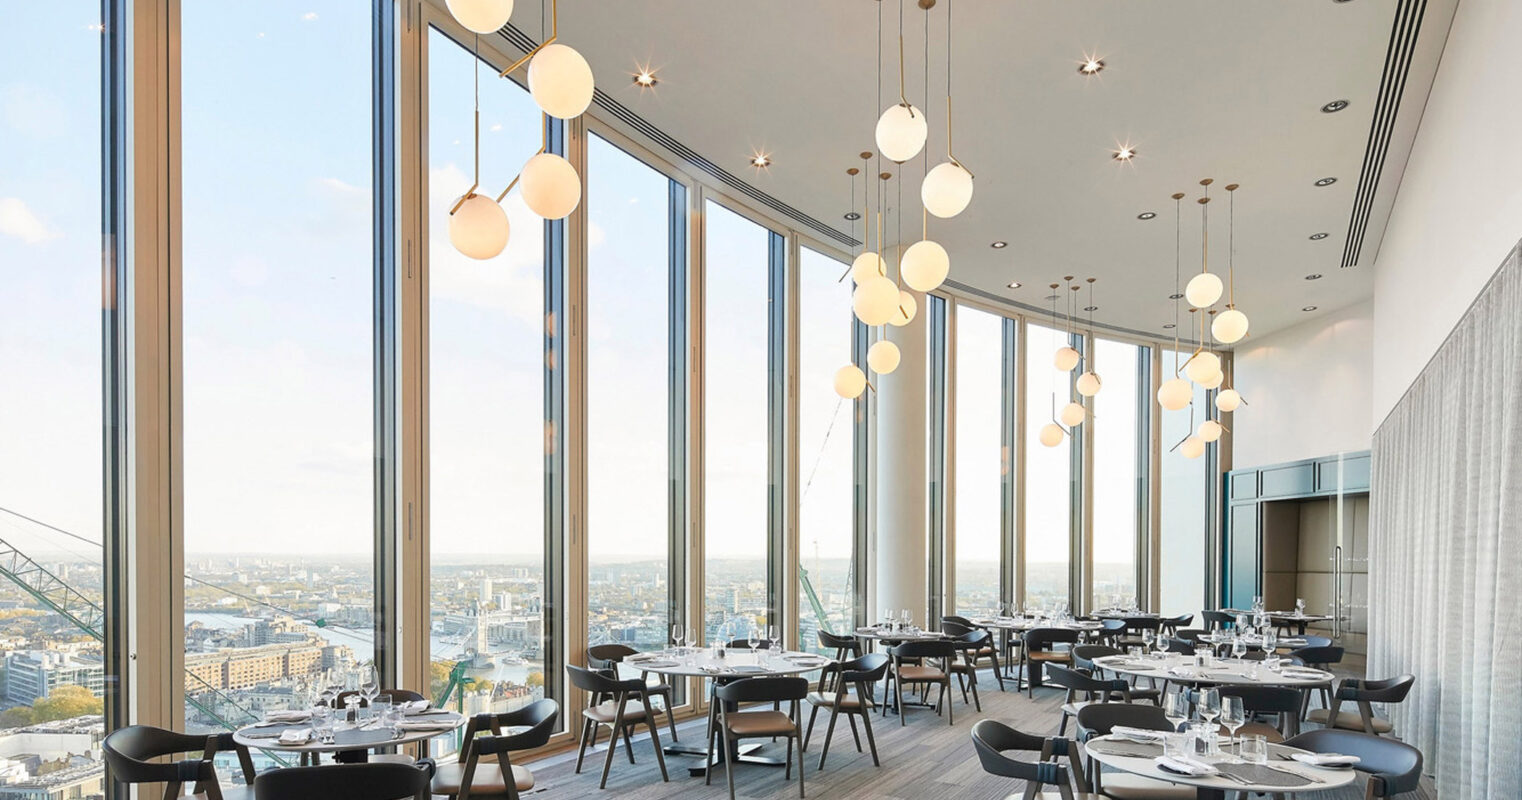 Modern restaurant space with floor-to-ceiling windows offering expansive cityscape views. The interior features sleek minimalist furniture, with a neutral color palette and strategically placed spherical pendant lights creating a rhythm in the vertical space.